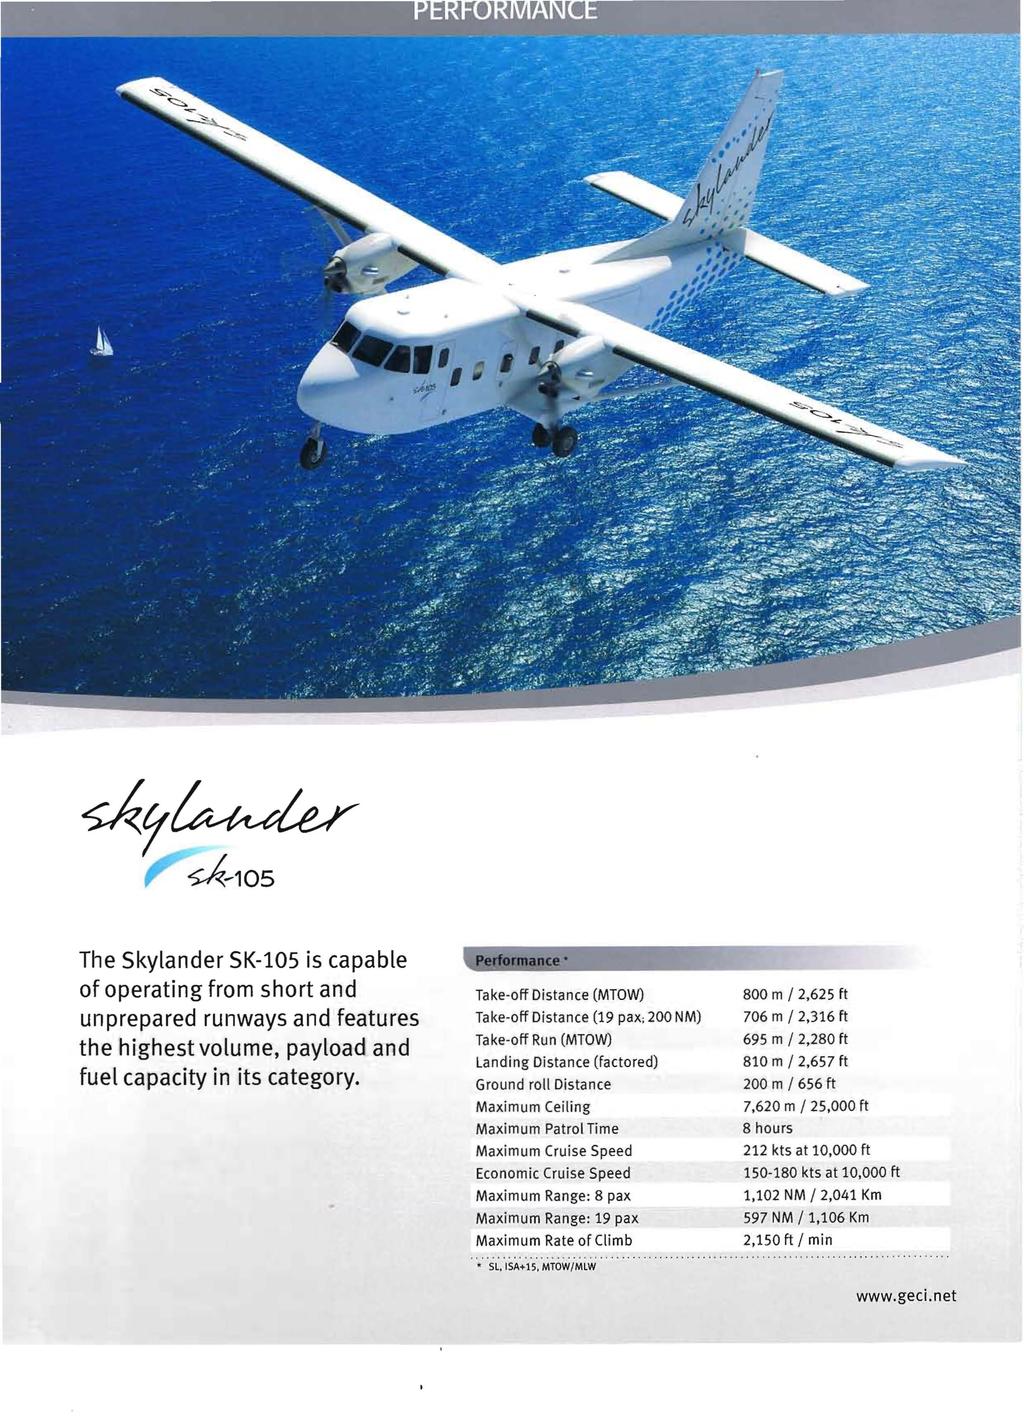 The Skylander SK-lüS is capable of operating from short and unprepared runways and features the highest volume, payload and fuel capacity in its category.